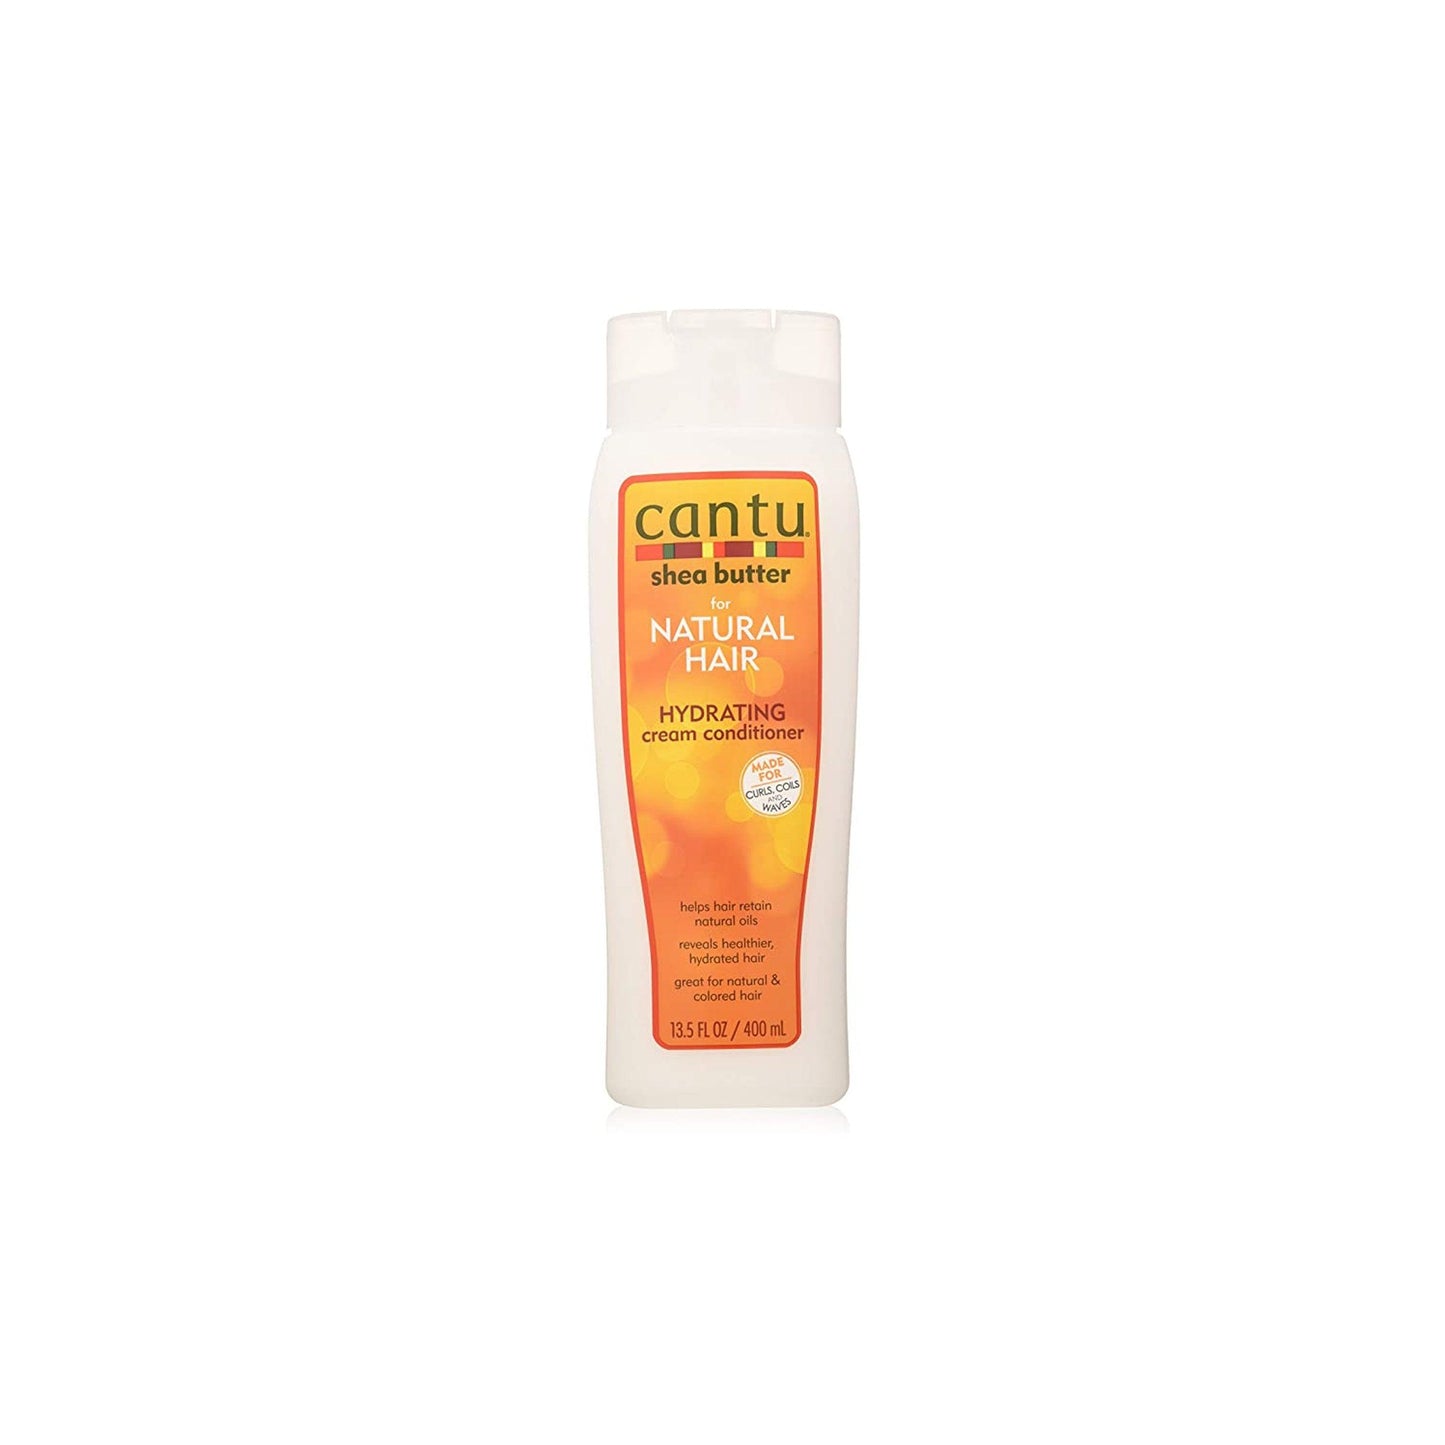 Cantu Shea Butter for Natural Hair Hydrating Cream Conditioner - Beauty Bounty